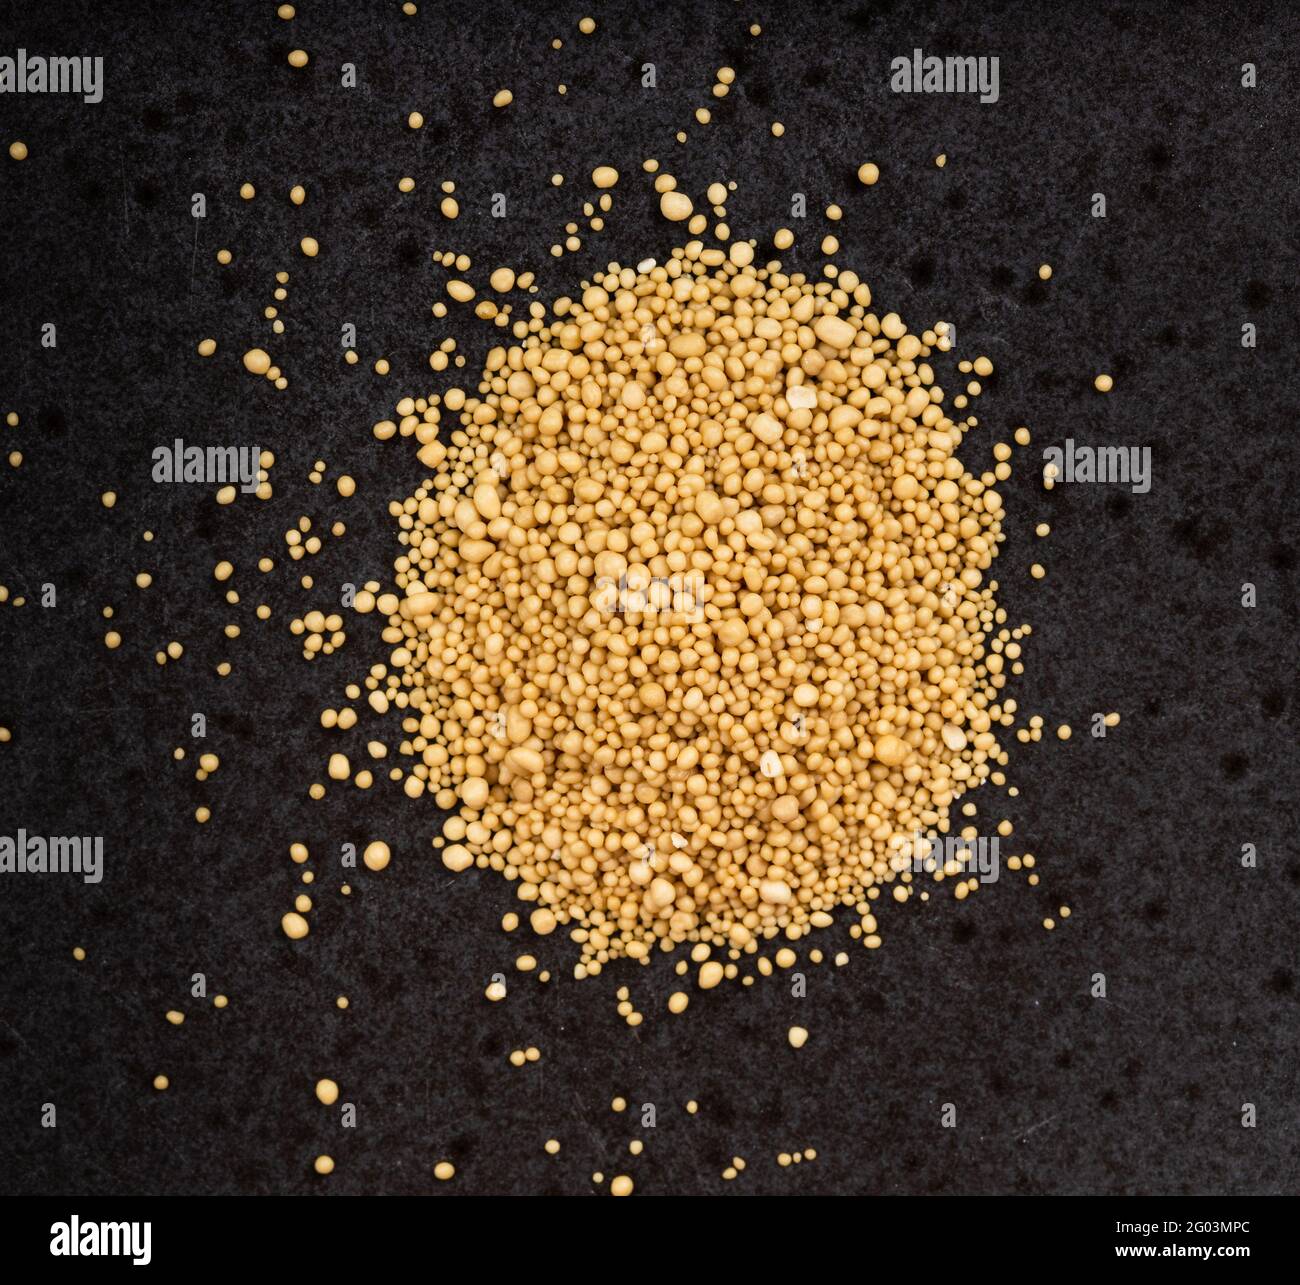 top view of pile of granulated dried yeast close up on black ceramic plate Stock Photo